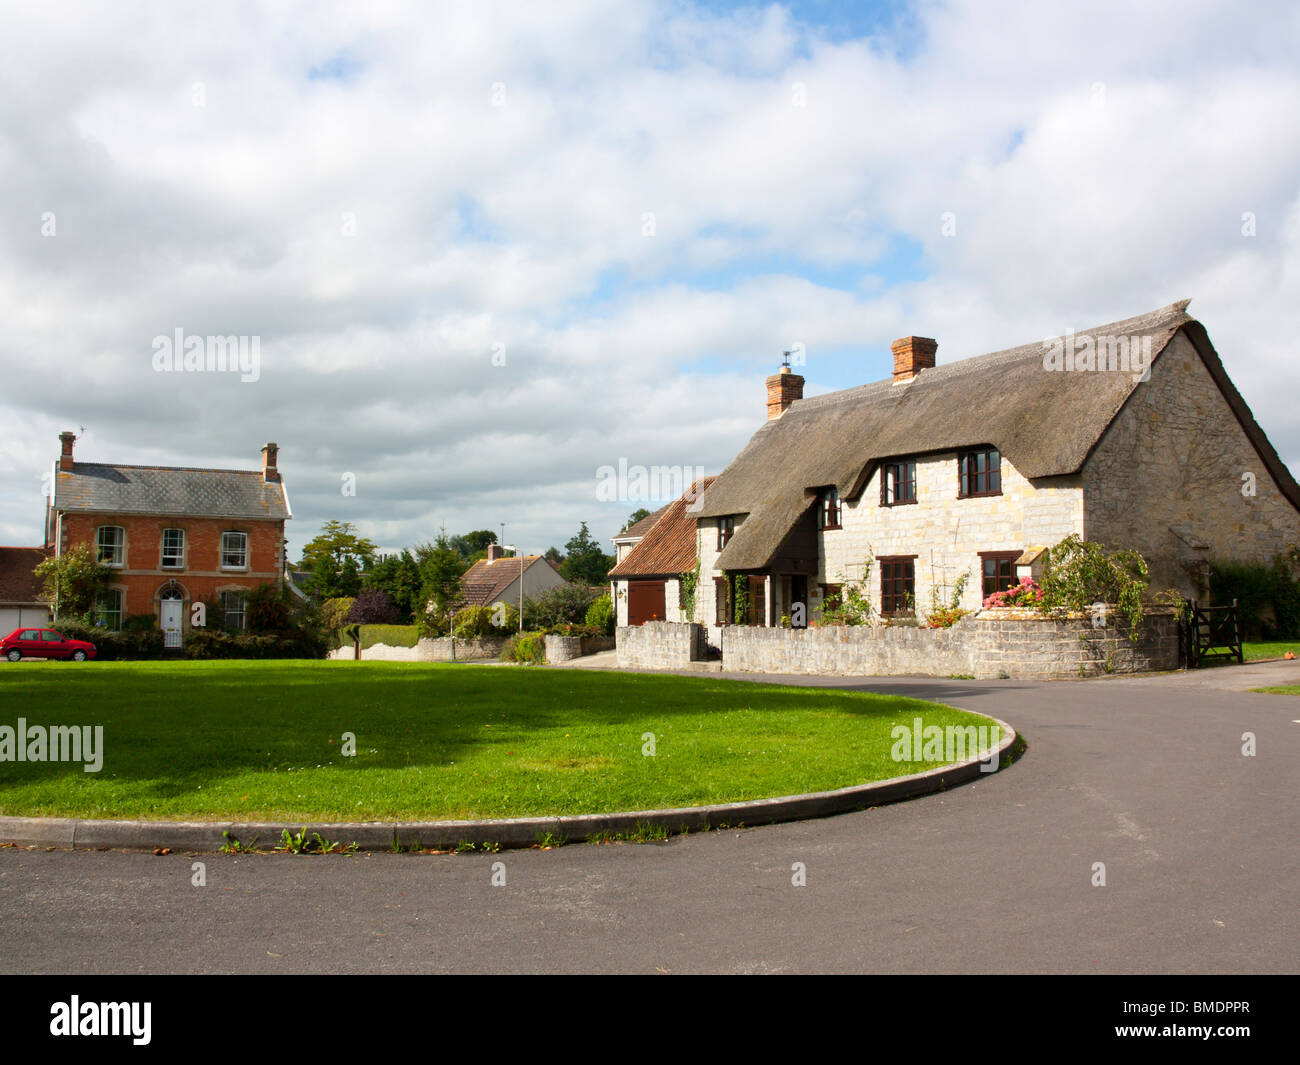 Thatched cottages at Curry Rivel Somerset England Stock Photo